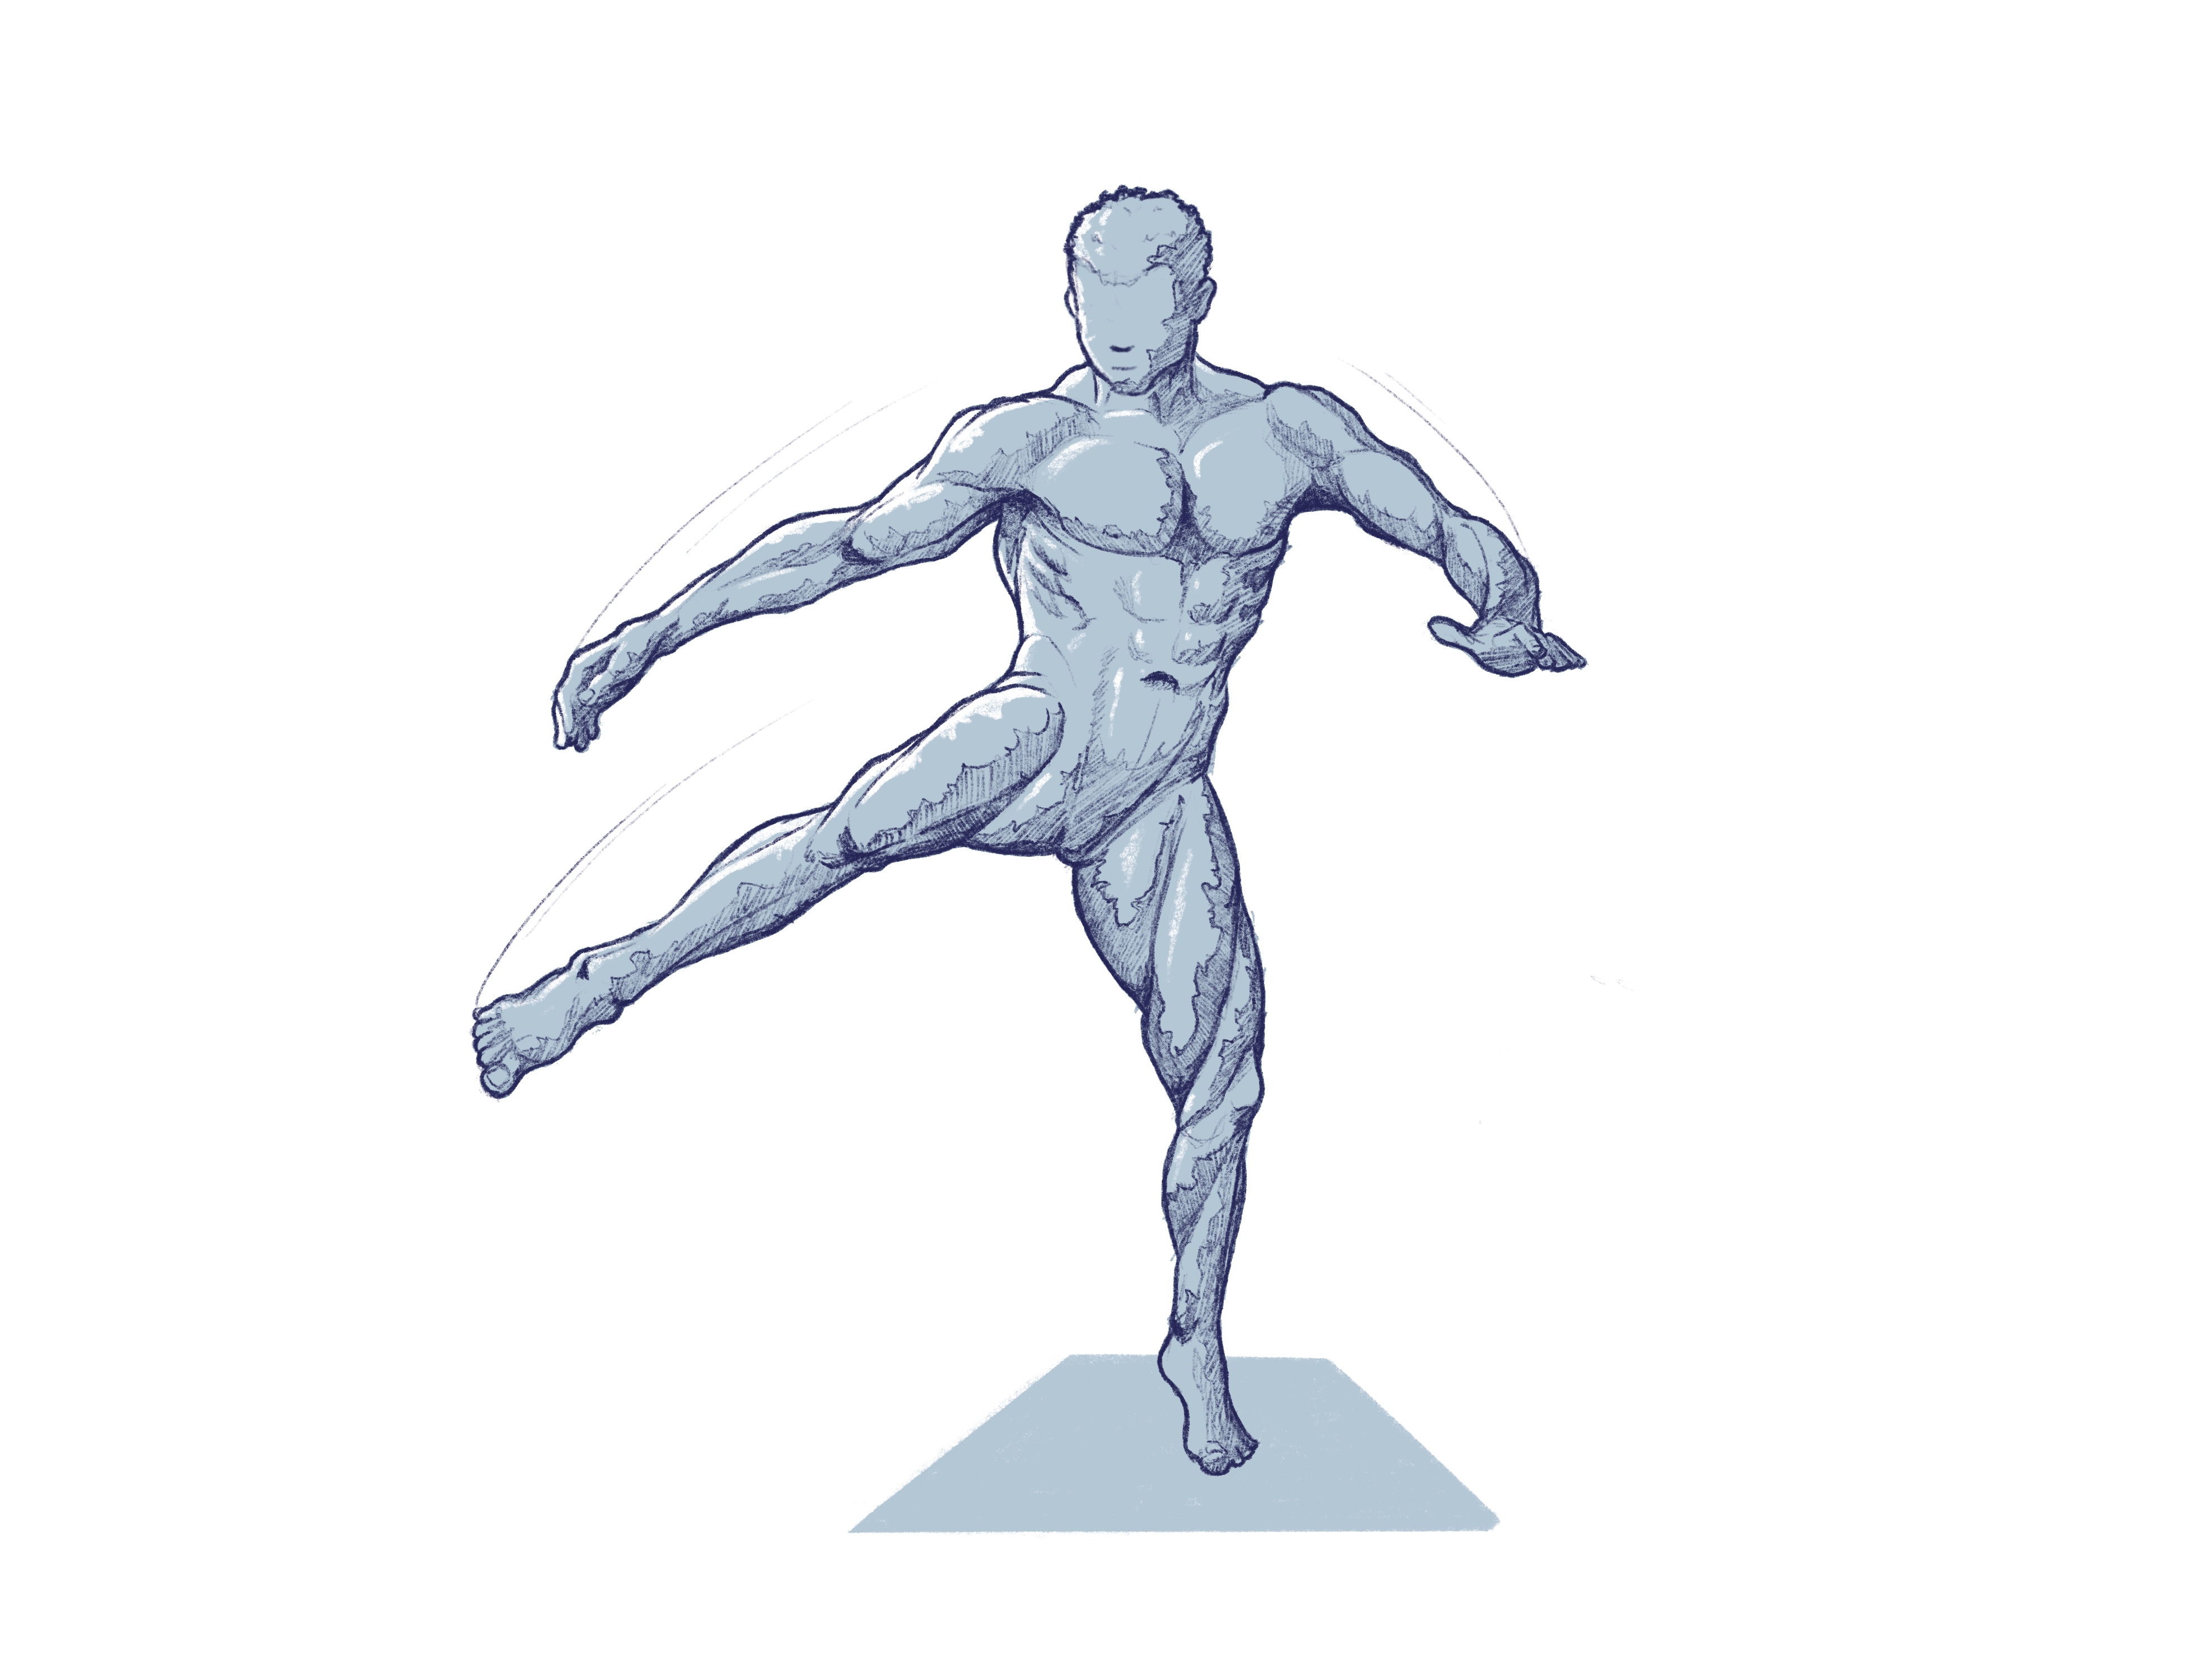 Poses for Artists - Some flying art references. It's the final day to get  20% off my Poses For Artists Book Series & new Card Decks. Use Tumblr code  NOV20off at https://gumroad.com/posemuse/